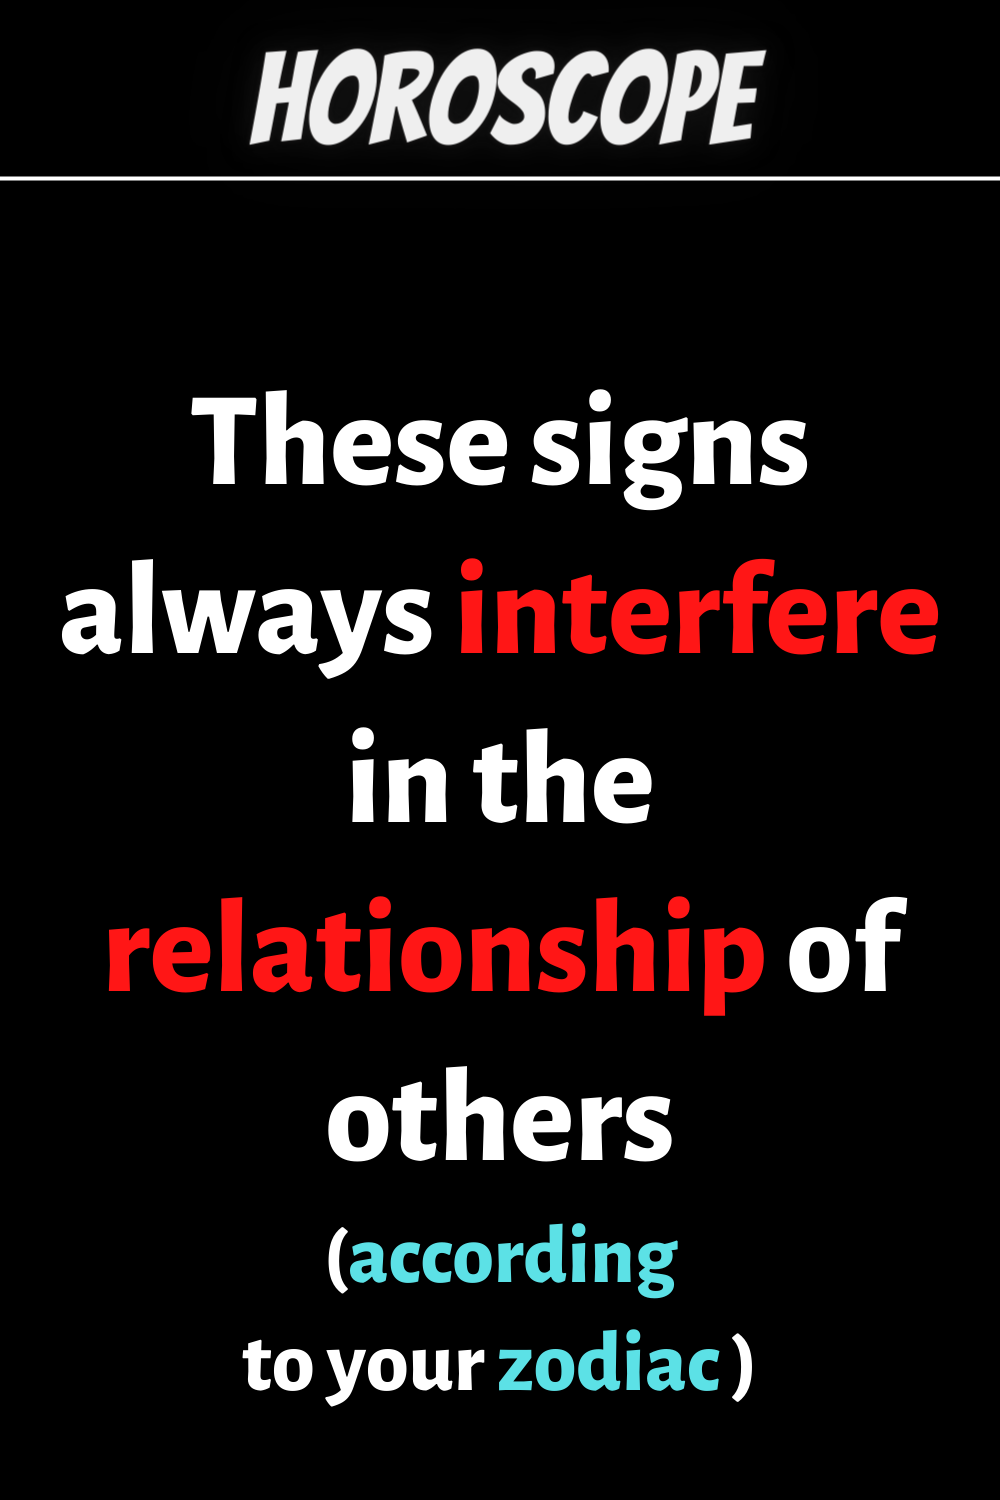 These zodiac signs always interfere in the relationship of others